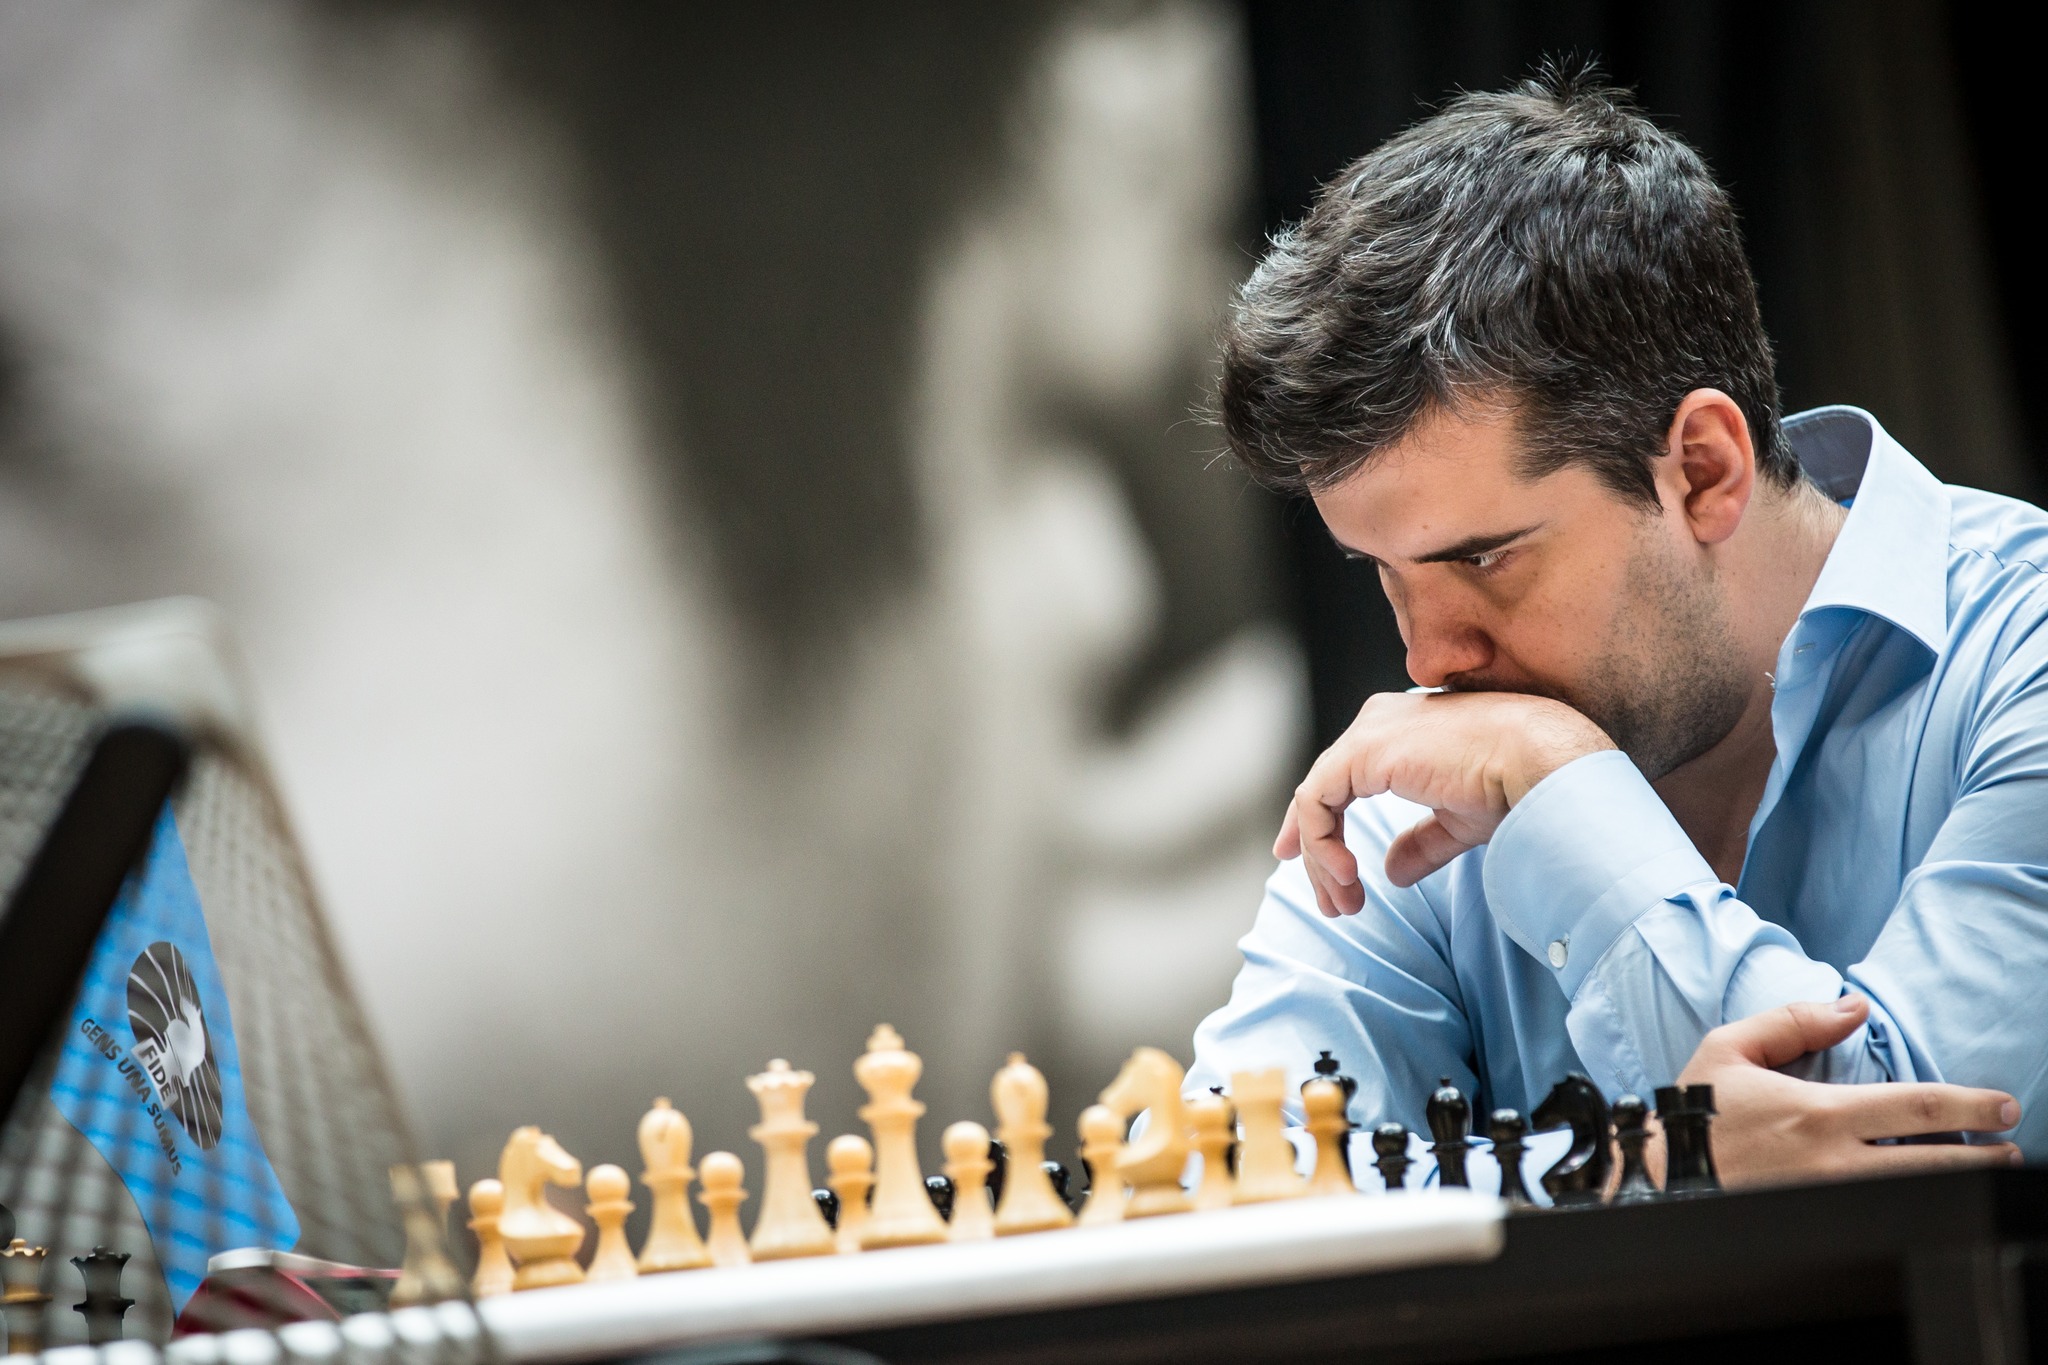 Ding vs. Nepomniachtchi: It All Comes Down To Tiebreaks, FIDE World  Championship 2023